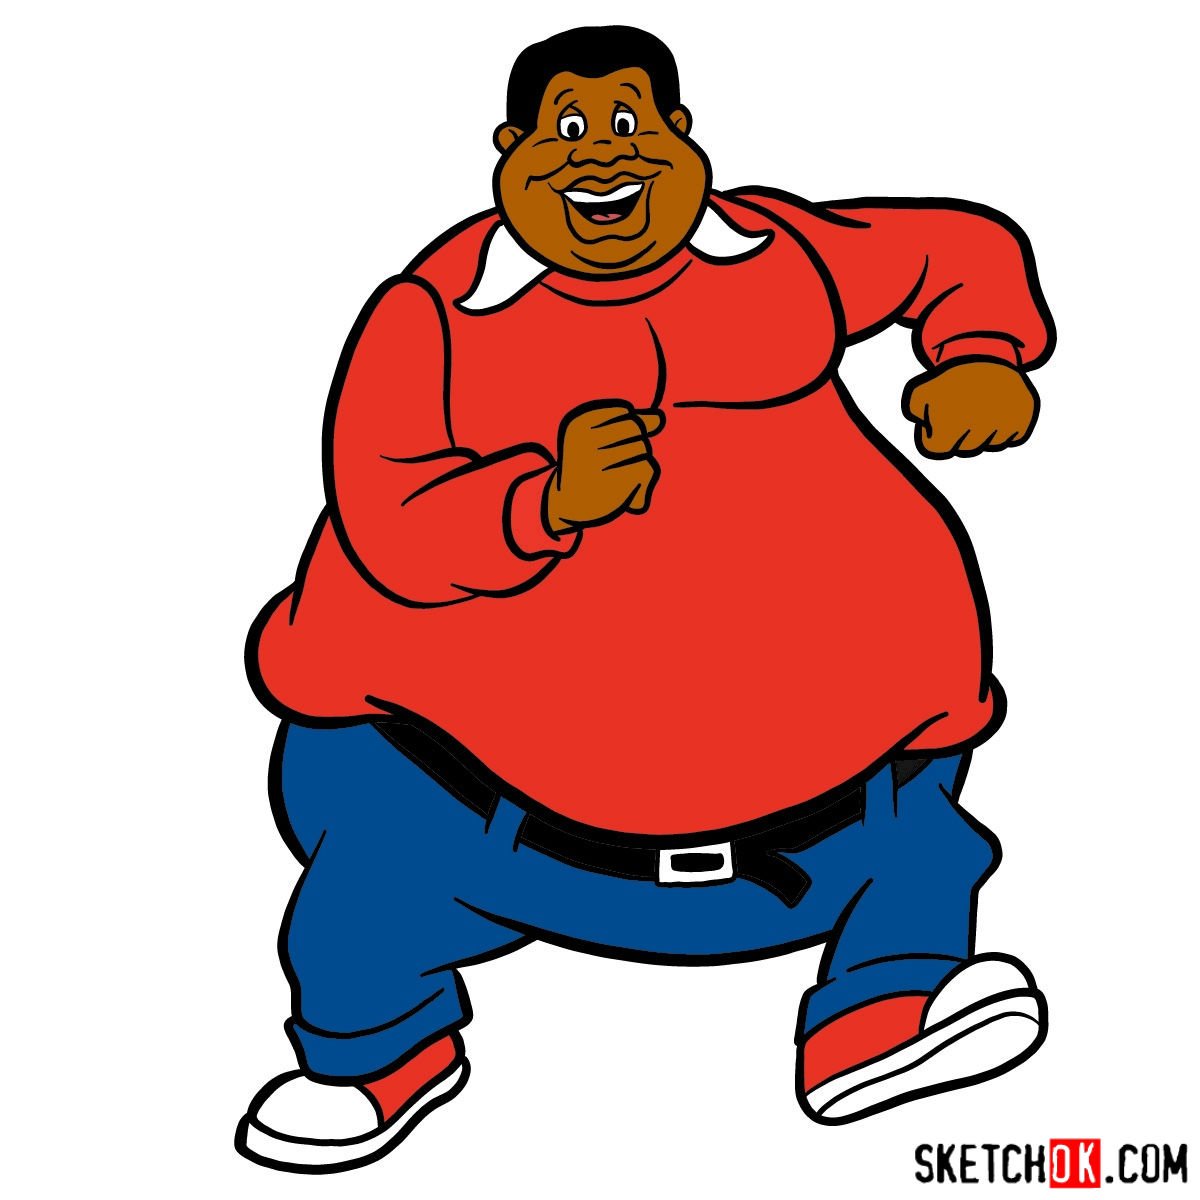 How to draw Fat Albert